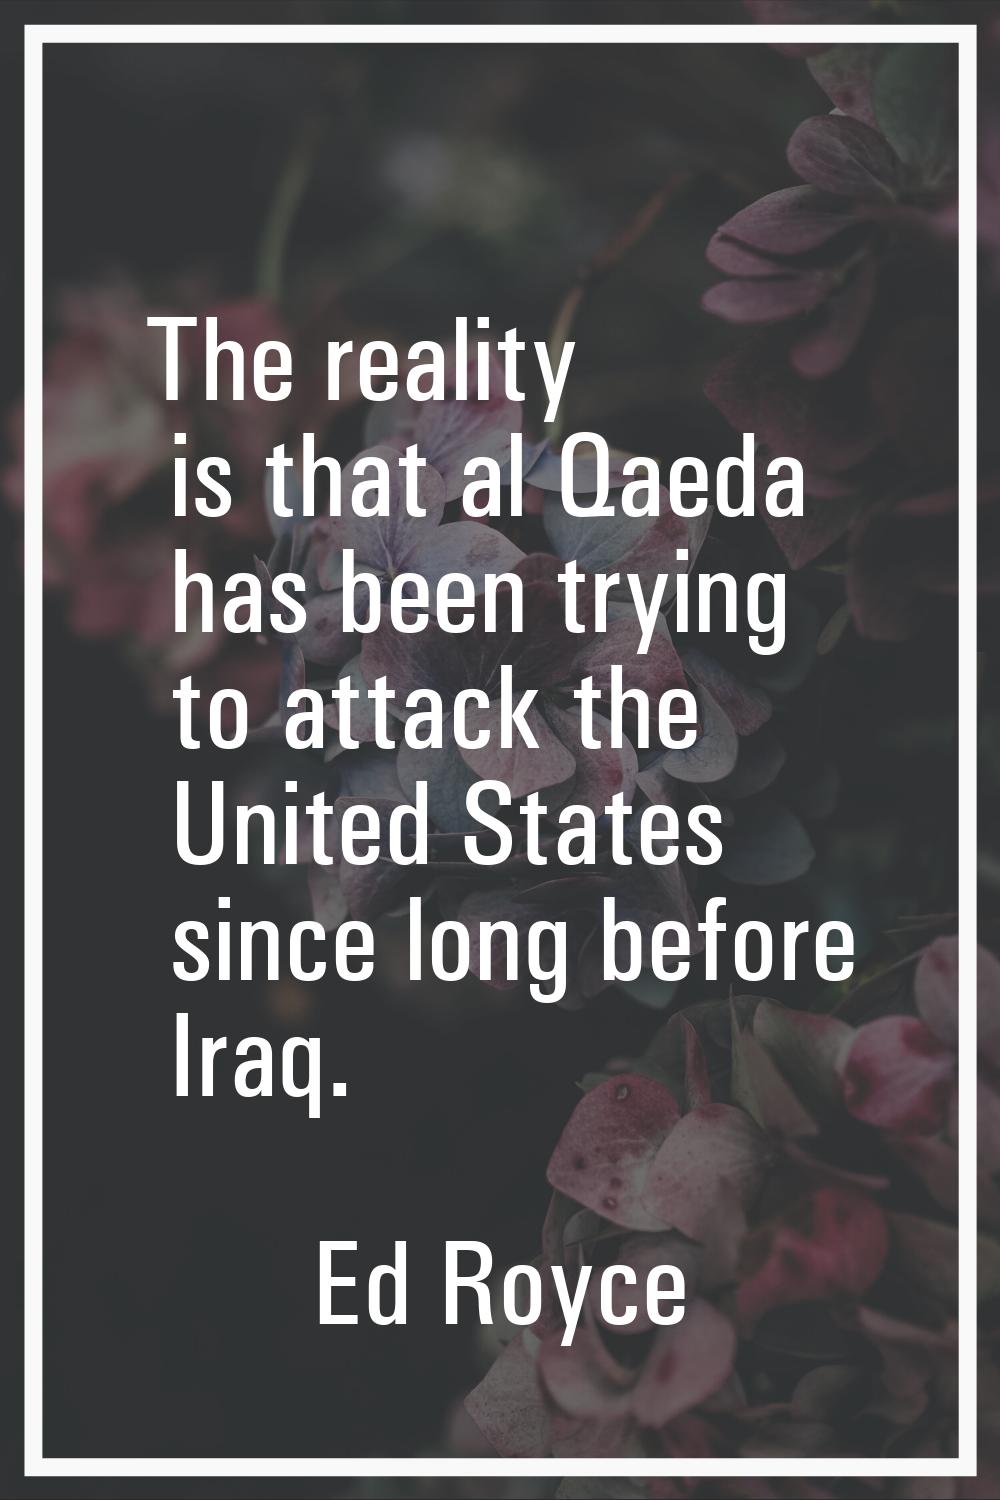 The reality is that al Qaeda has been trying to attack the United States since long before Iraq.